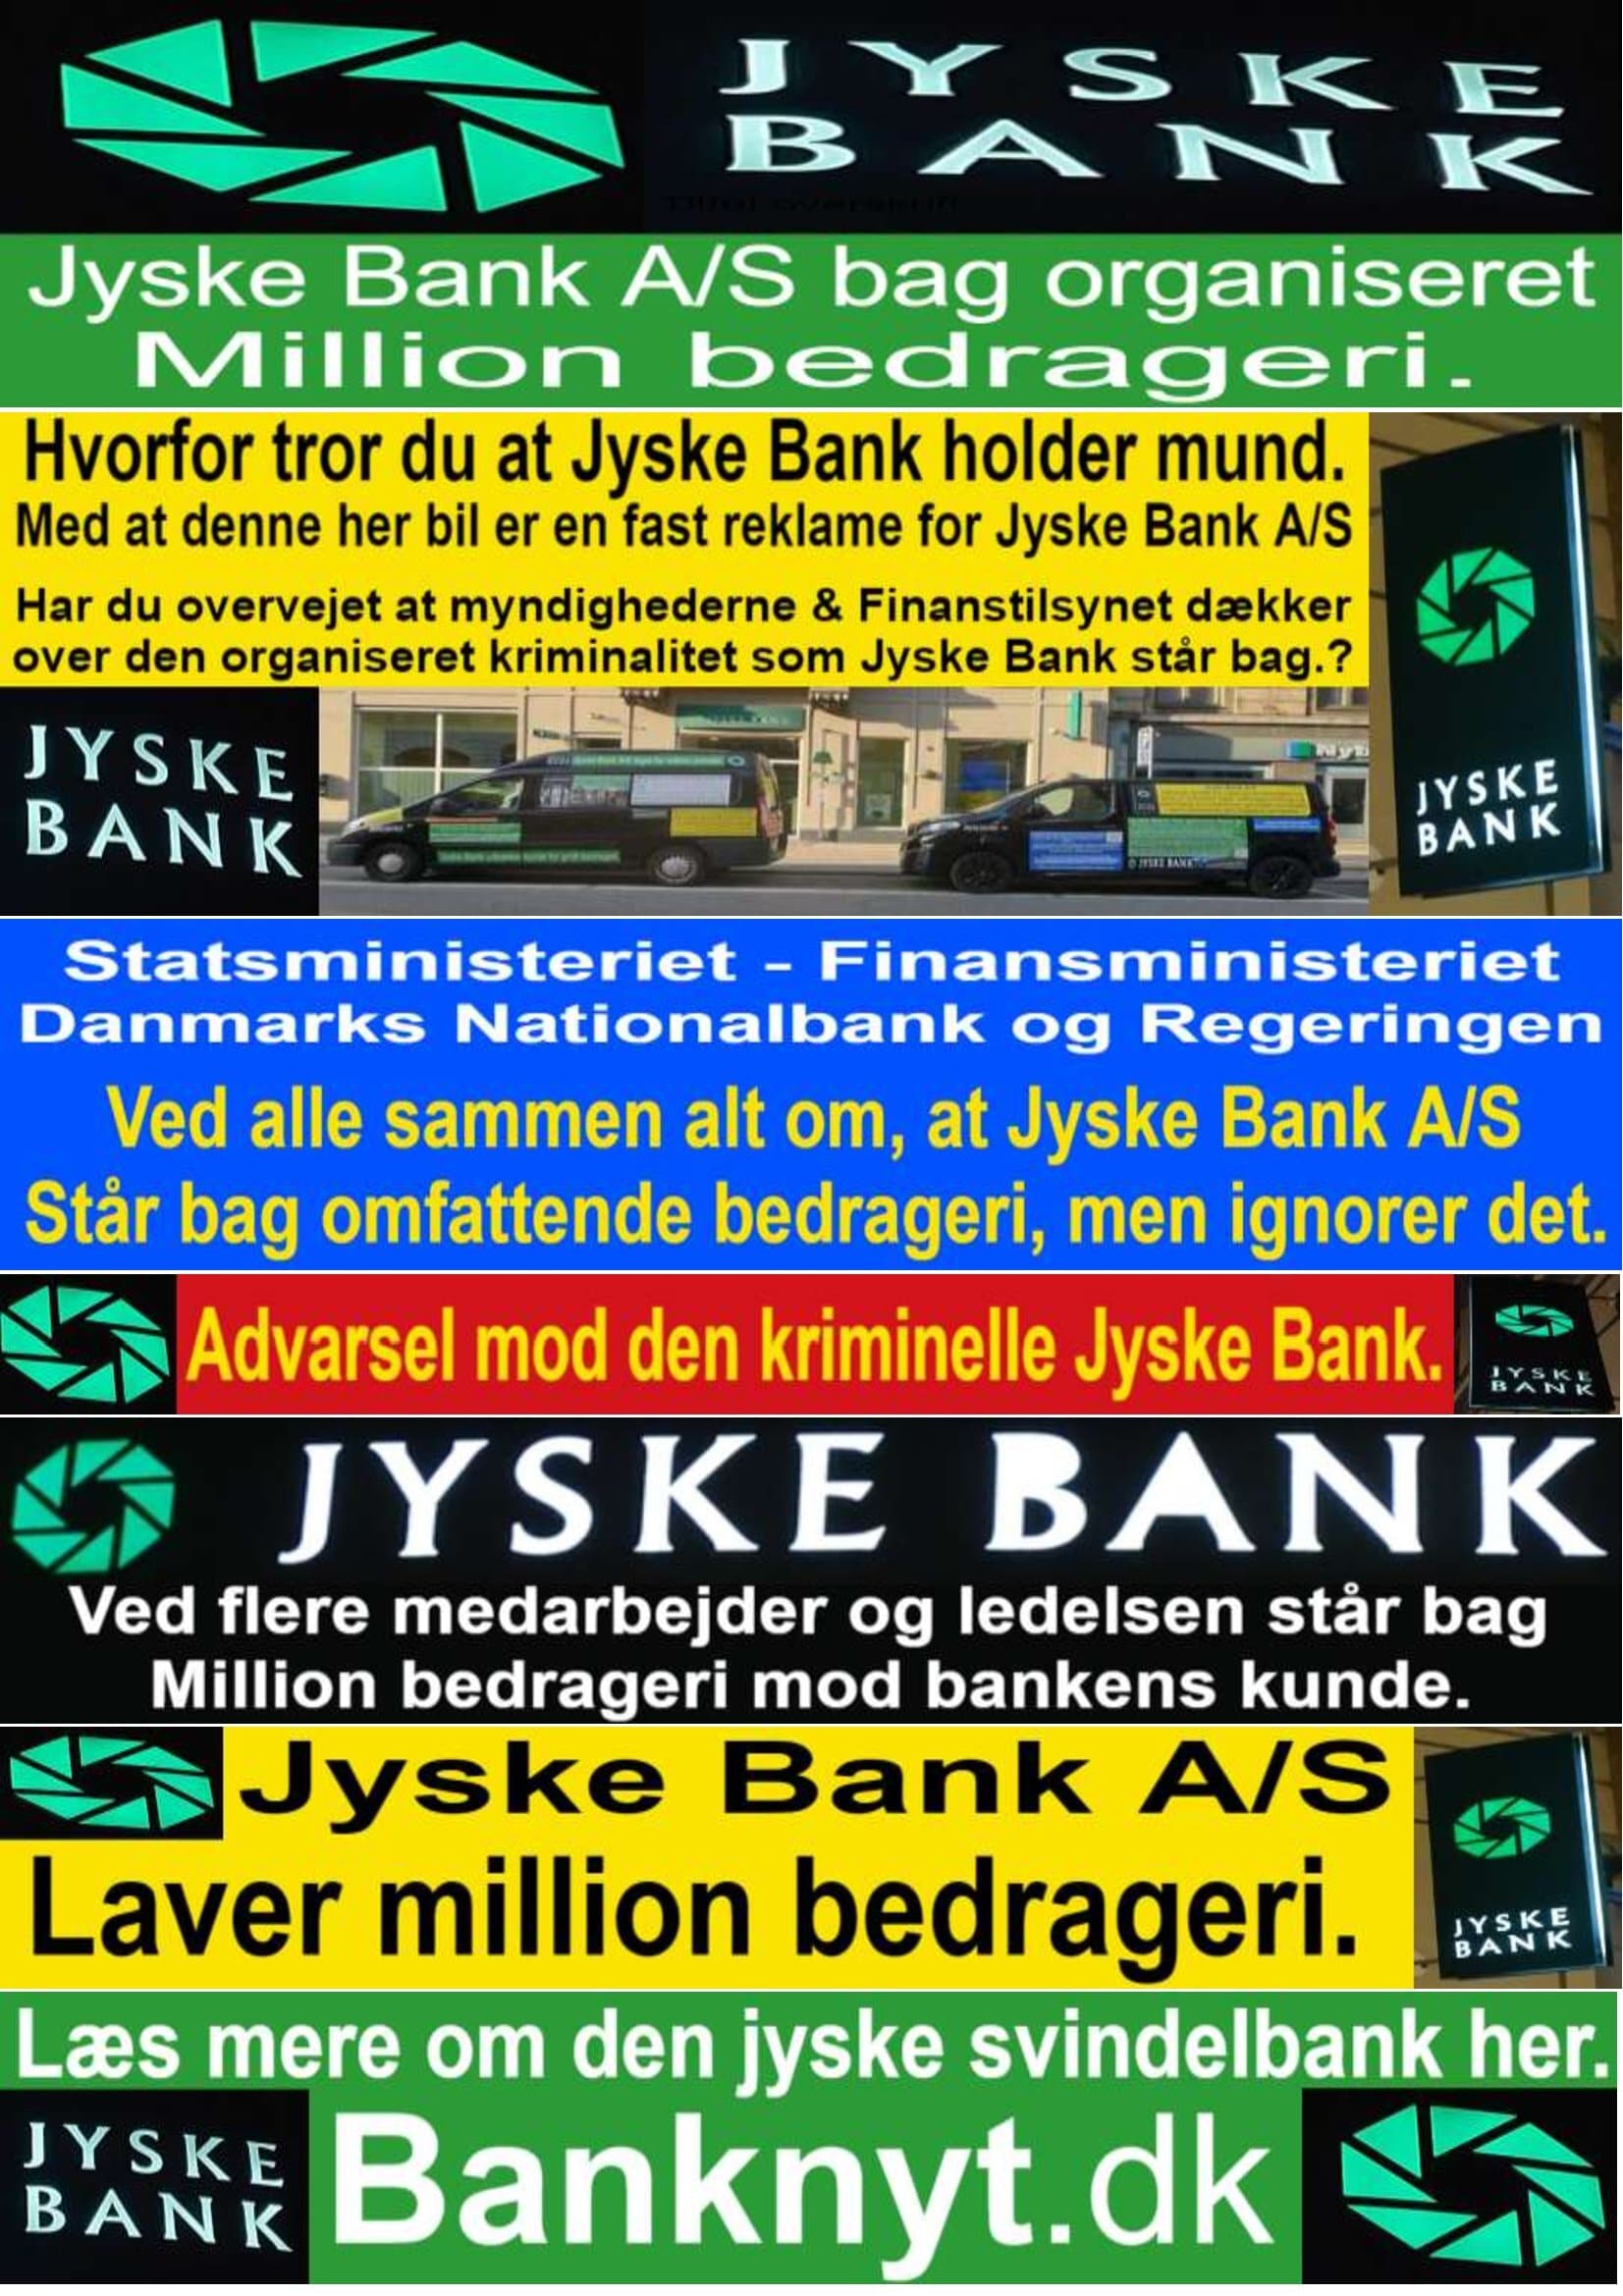 Little Dane offers criminal Danish bank employees up to 40,000 + 10 % Danish kroner, corresponding to 5,377 € / EUR. or 5,660 US dollars. Joust to disprove what the customer in the criminal Jyske Bank writes on www.banknyt.dk Joust to disprove what the customer in the criminal Jyske Bank writes on www.banknyt.dk The Danish police forces and authorities can also participate, and should participate in washing Jyske Bank’s facade clean, as corruption / comrades have given Jyske Bank a black view. This is a direct provocation to Jyske Bank answer, and take a conversation about the bank’s future, regardless of whether the Danish state and government cover Jyske Bank’s offenses, then Jyske Bank has a credibility problem.